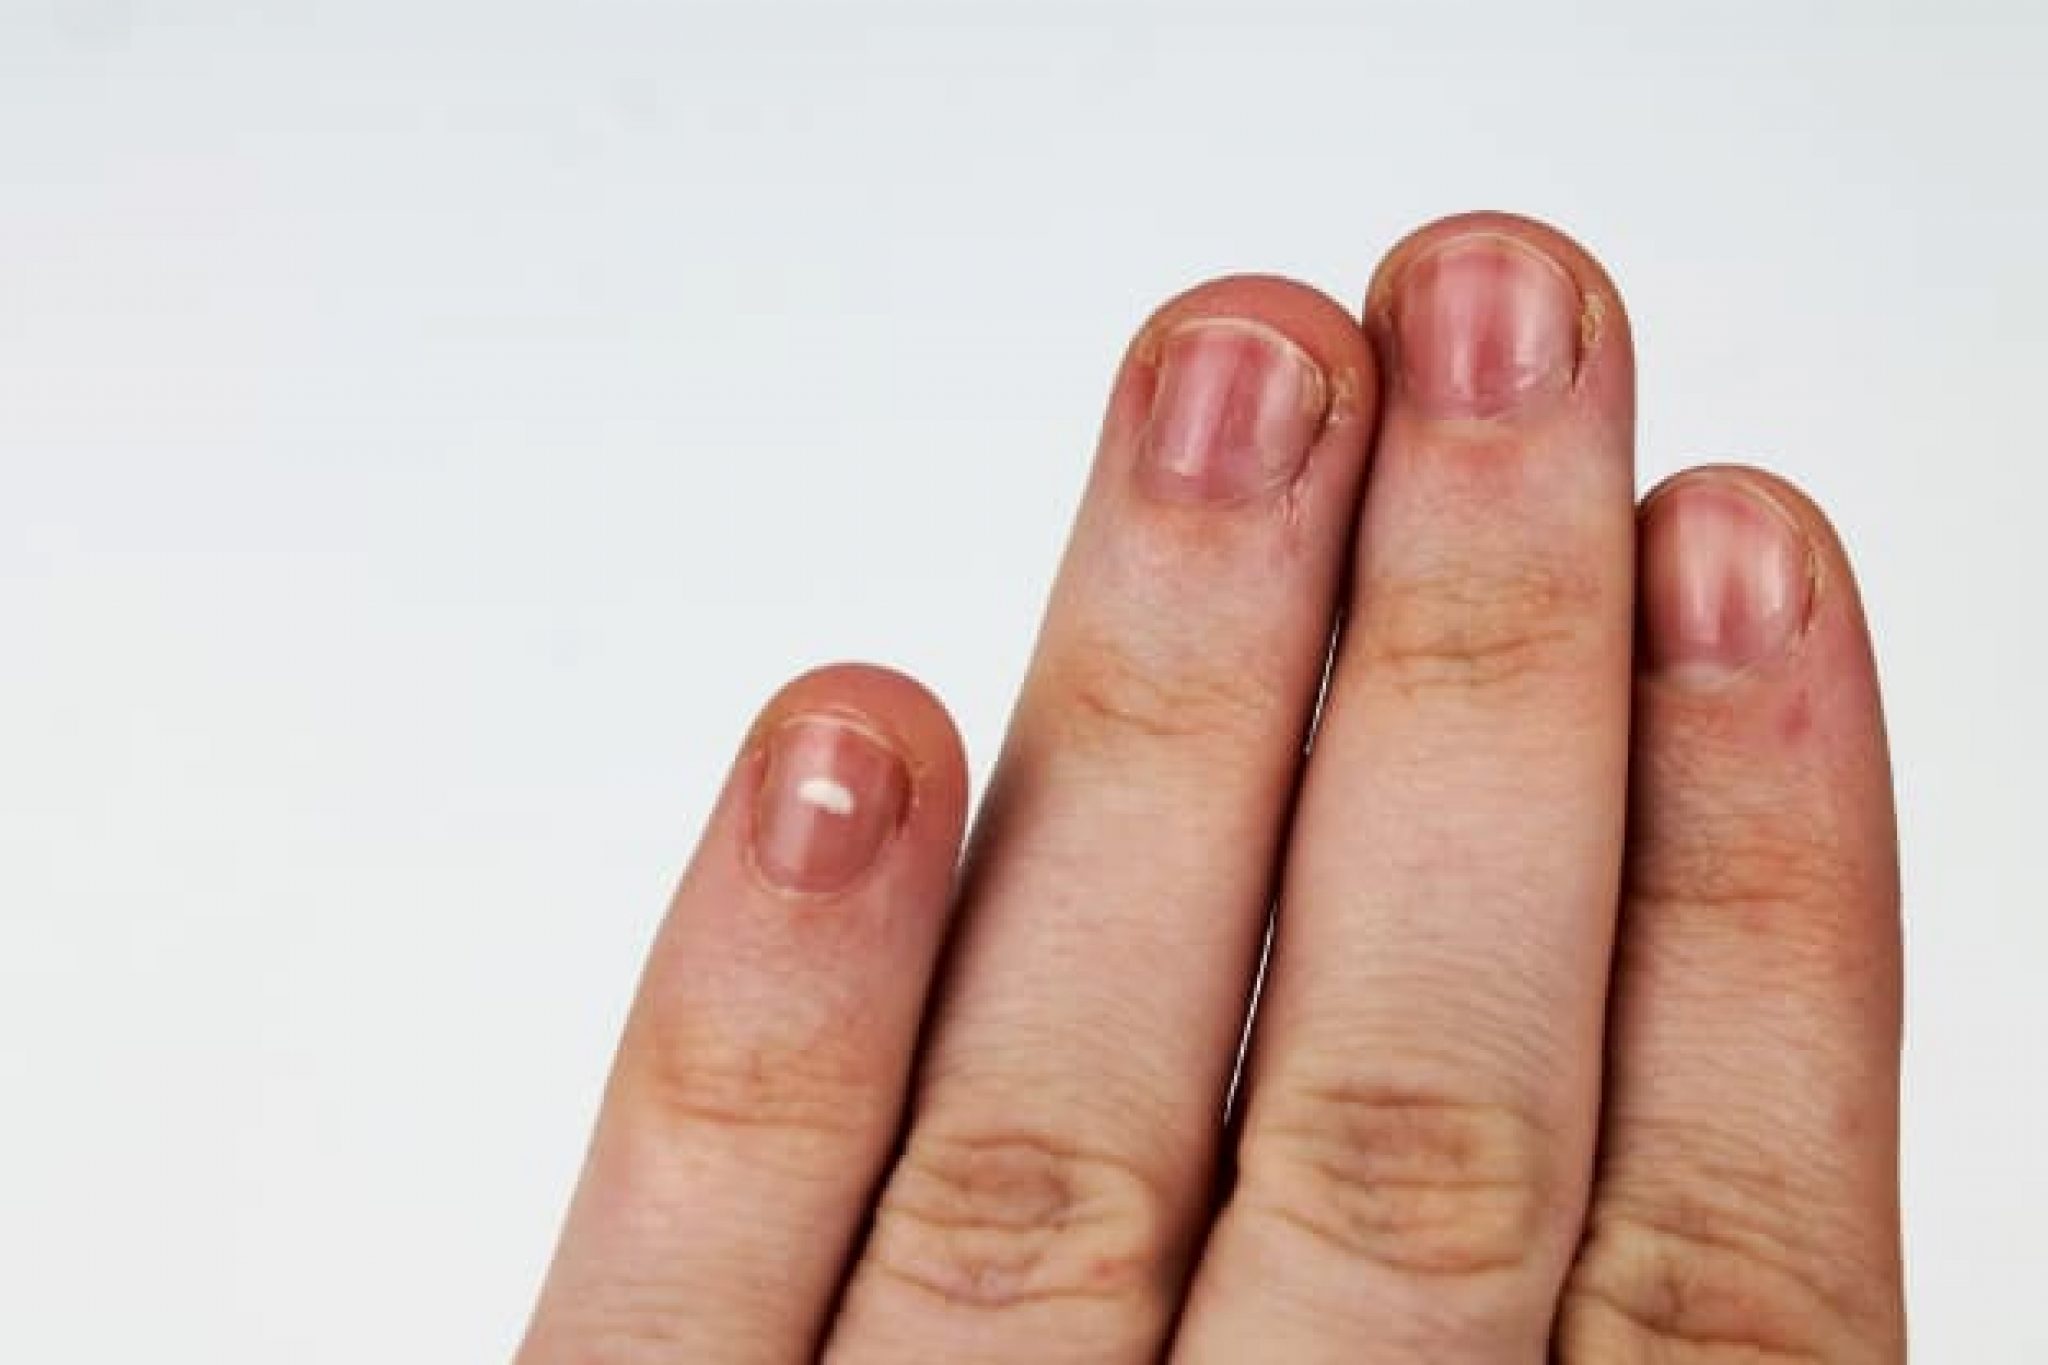 Redness of the nail bed caused by infection - wide 1